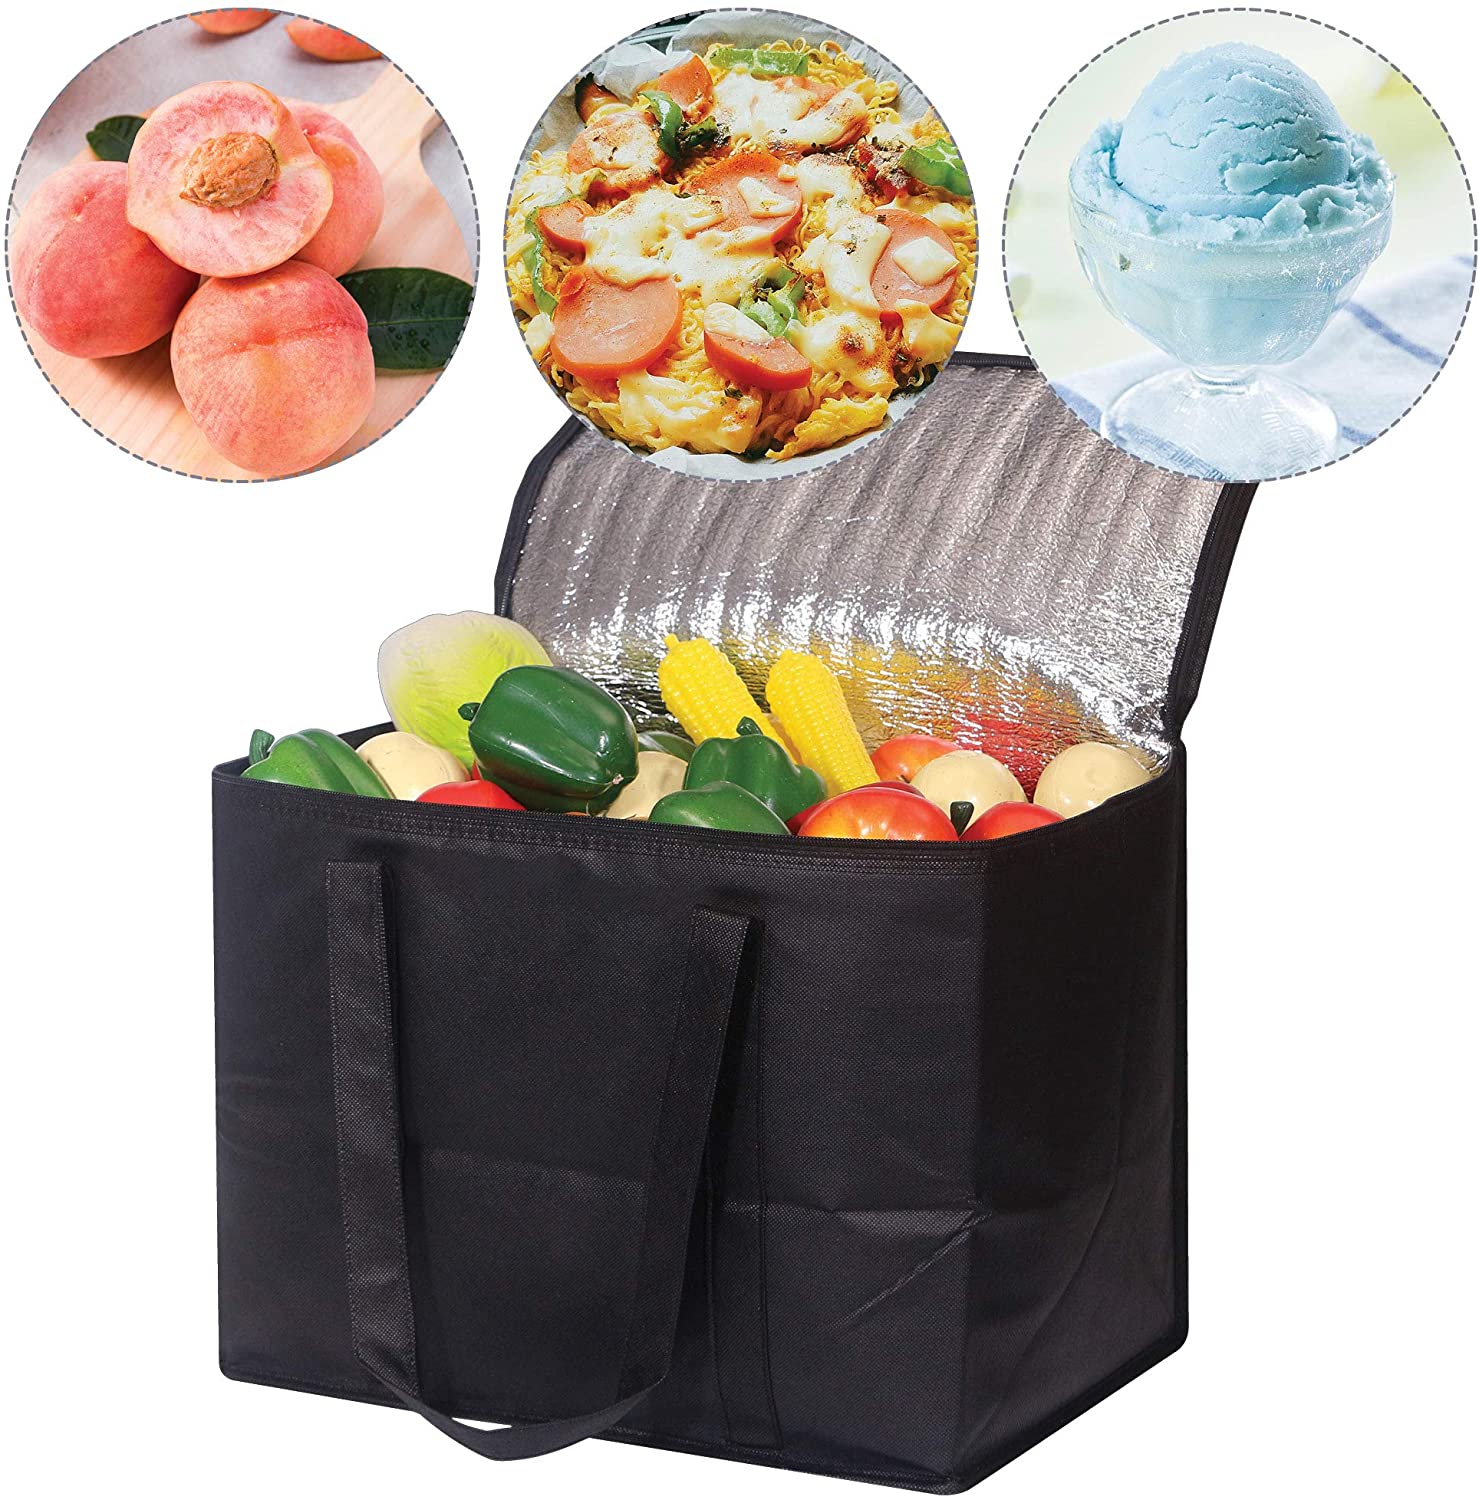 Reusable Shopping Bags for Groceries, 2 Pack XL Foldable Insulated Cooler Bag with Strong Handle & Zipper for Food Delivery, Travel - image 3 of 8